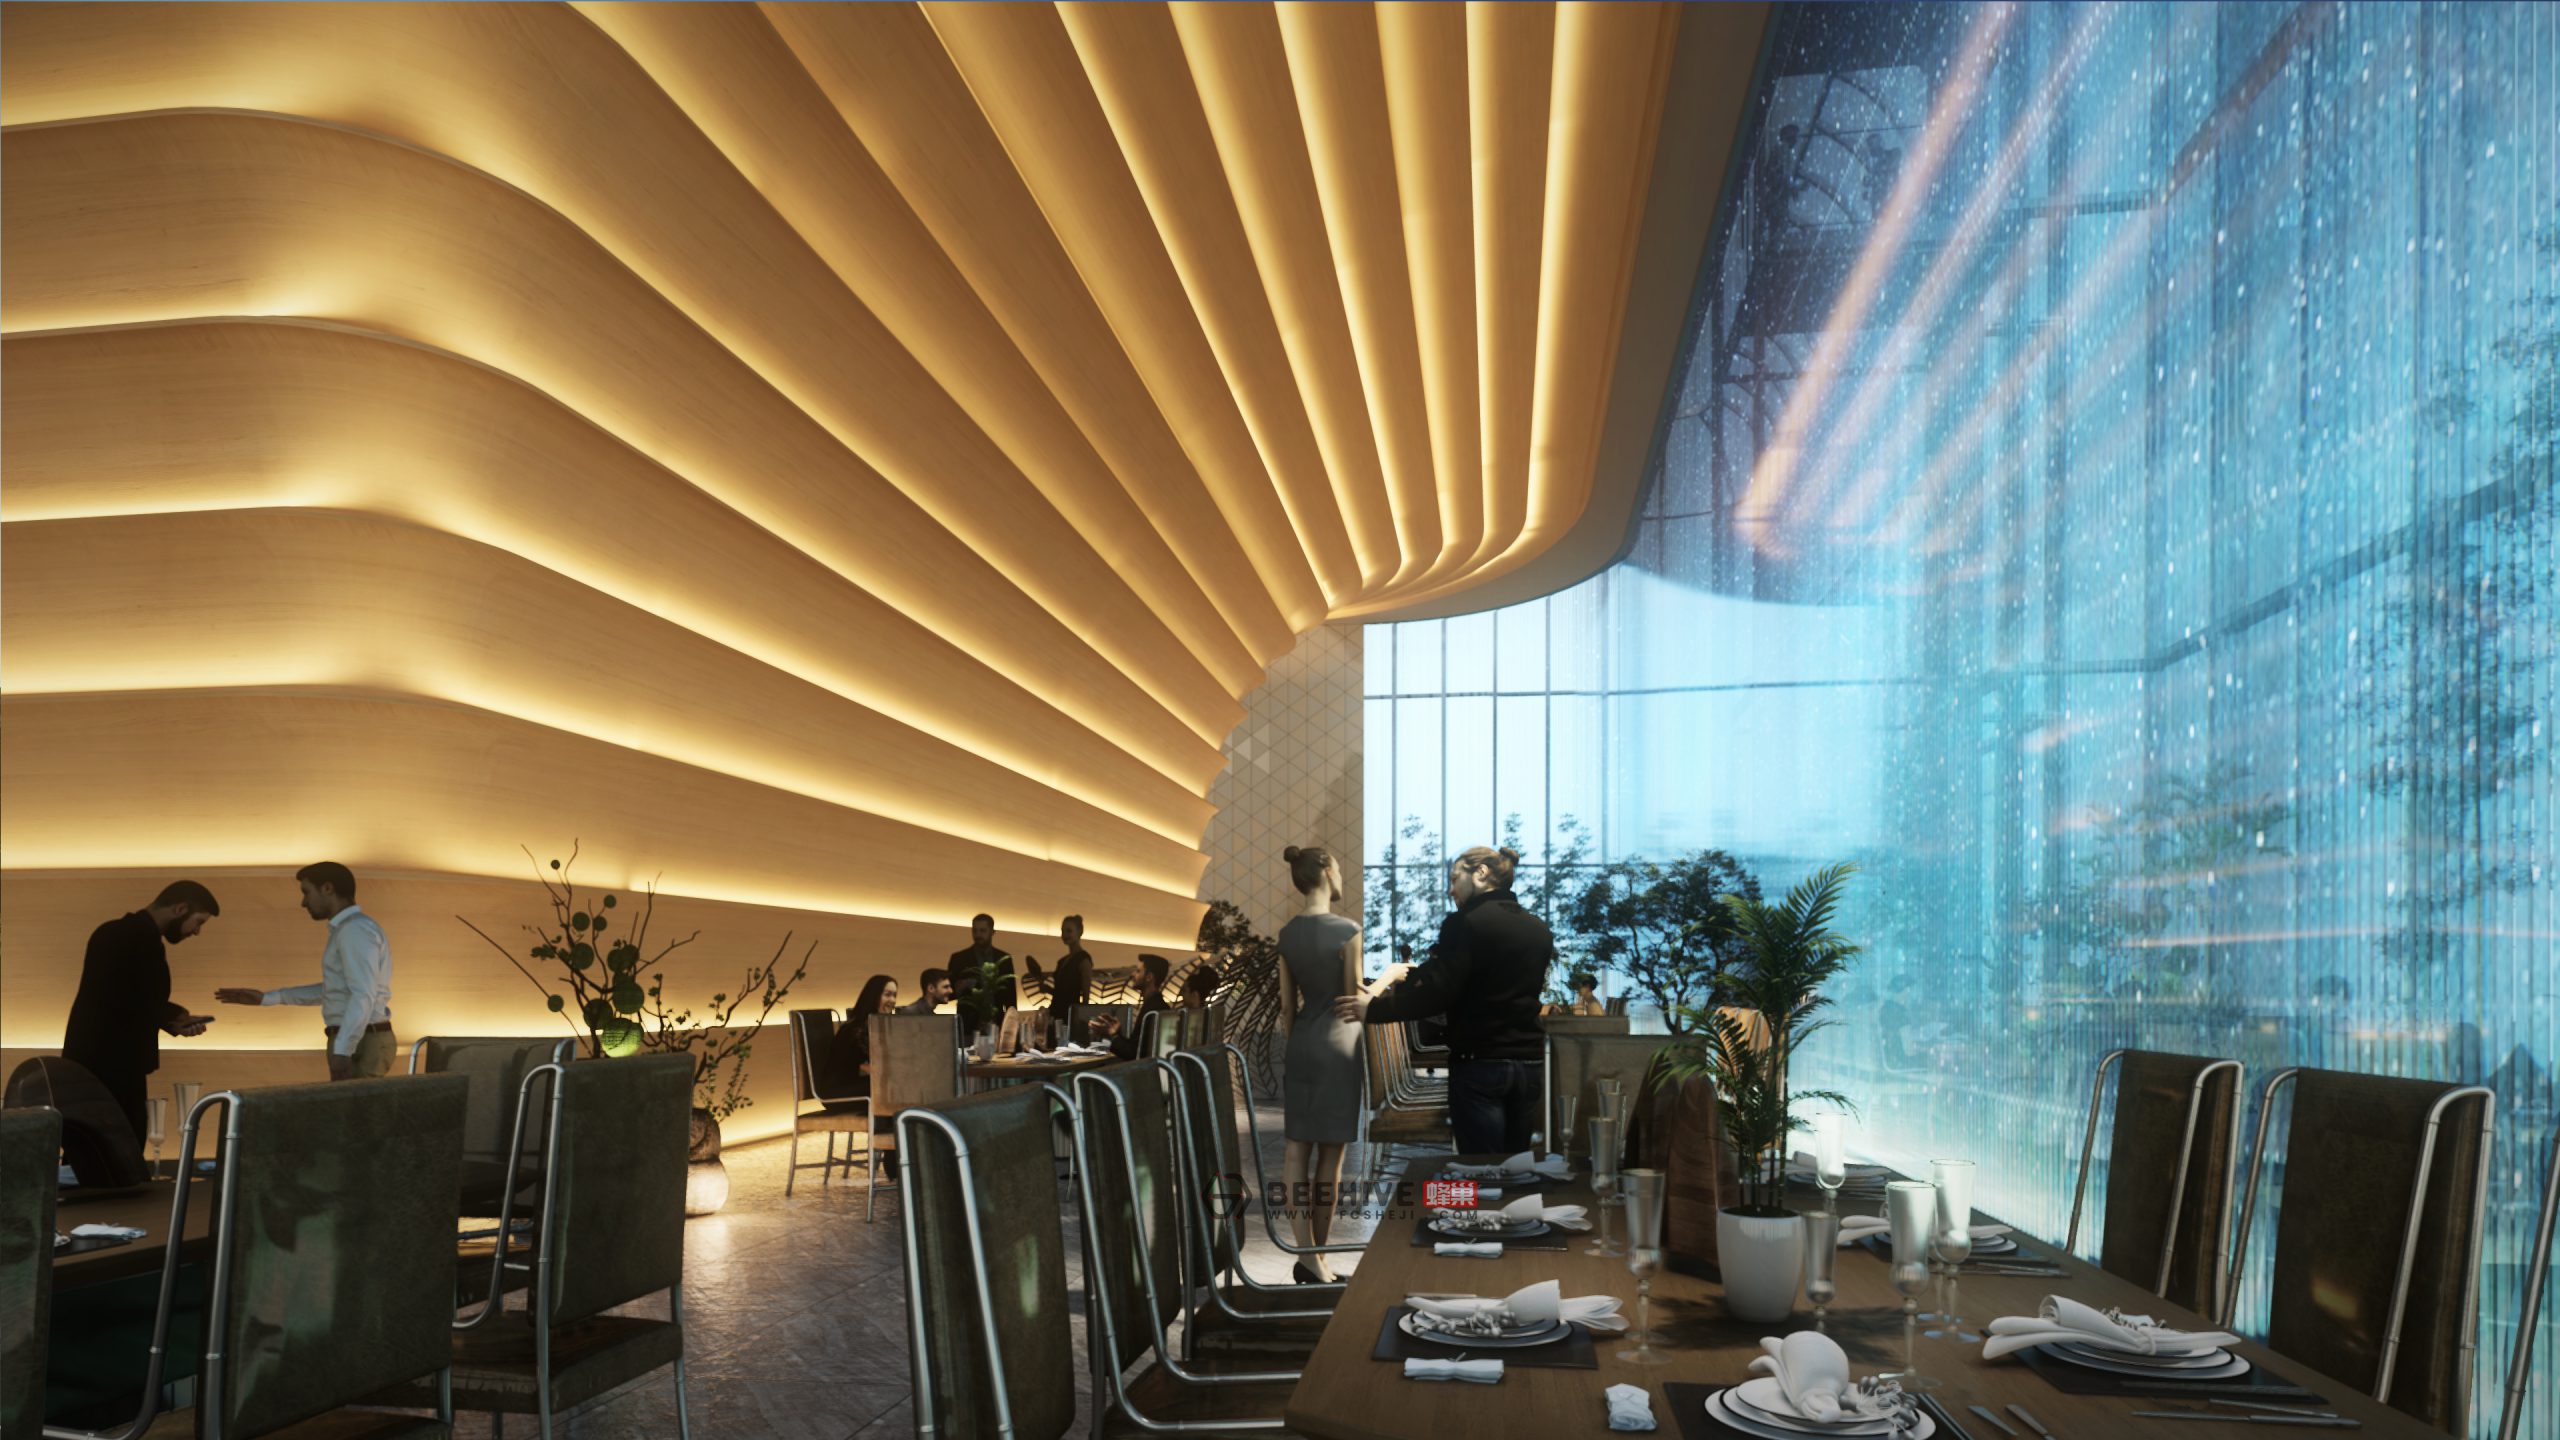 Nanjing Xin Jie Kou Suning Plaza. Design and Project Architect: Aedas. Client: Suning Real Estate Group CO., LTD.